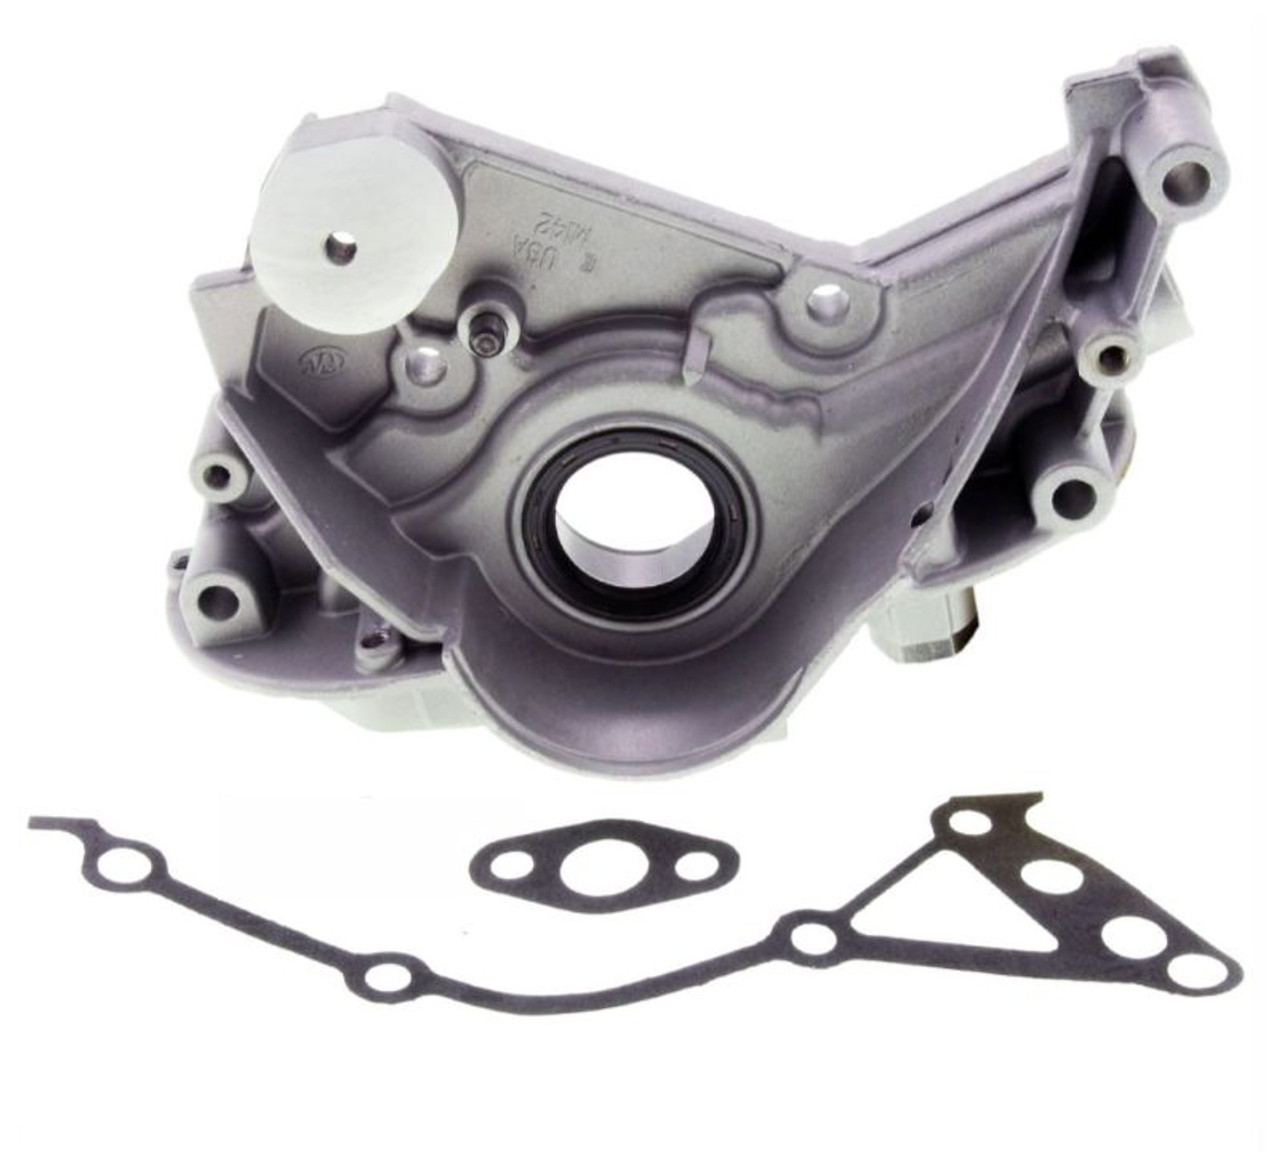 Oil Pump - 1988 Plymouth Voyager 3.0L (EP142.B12)